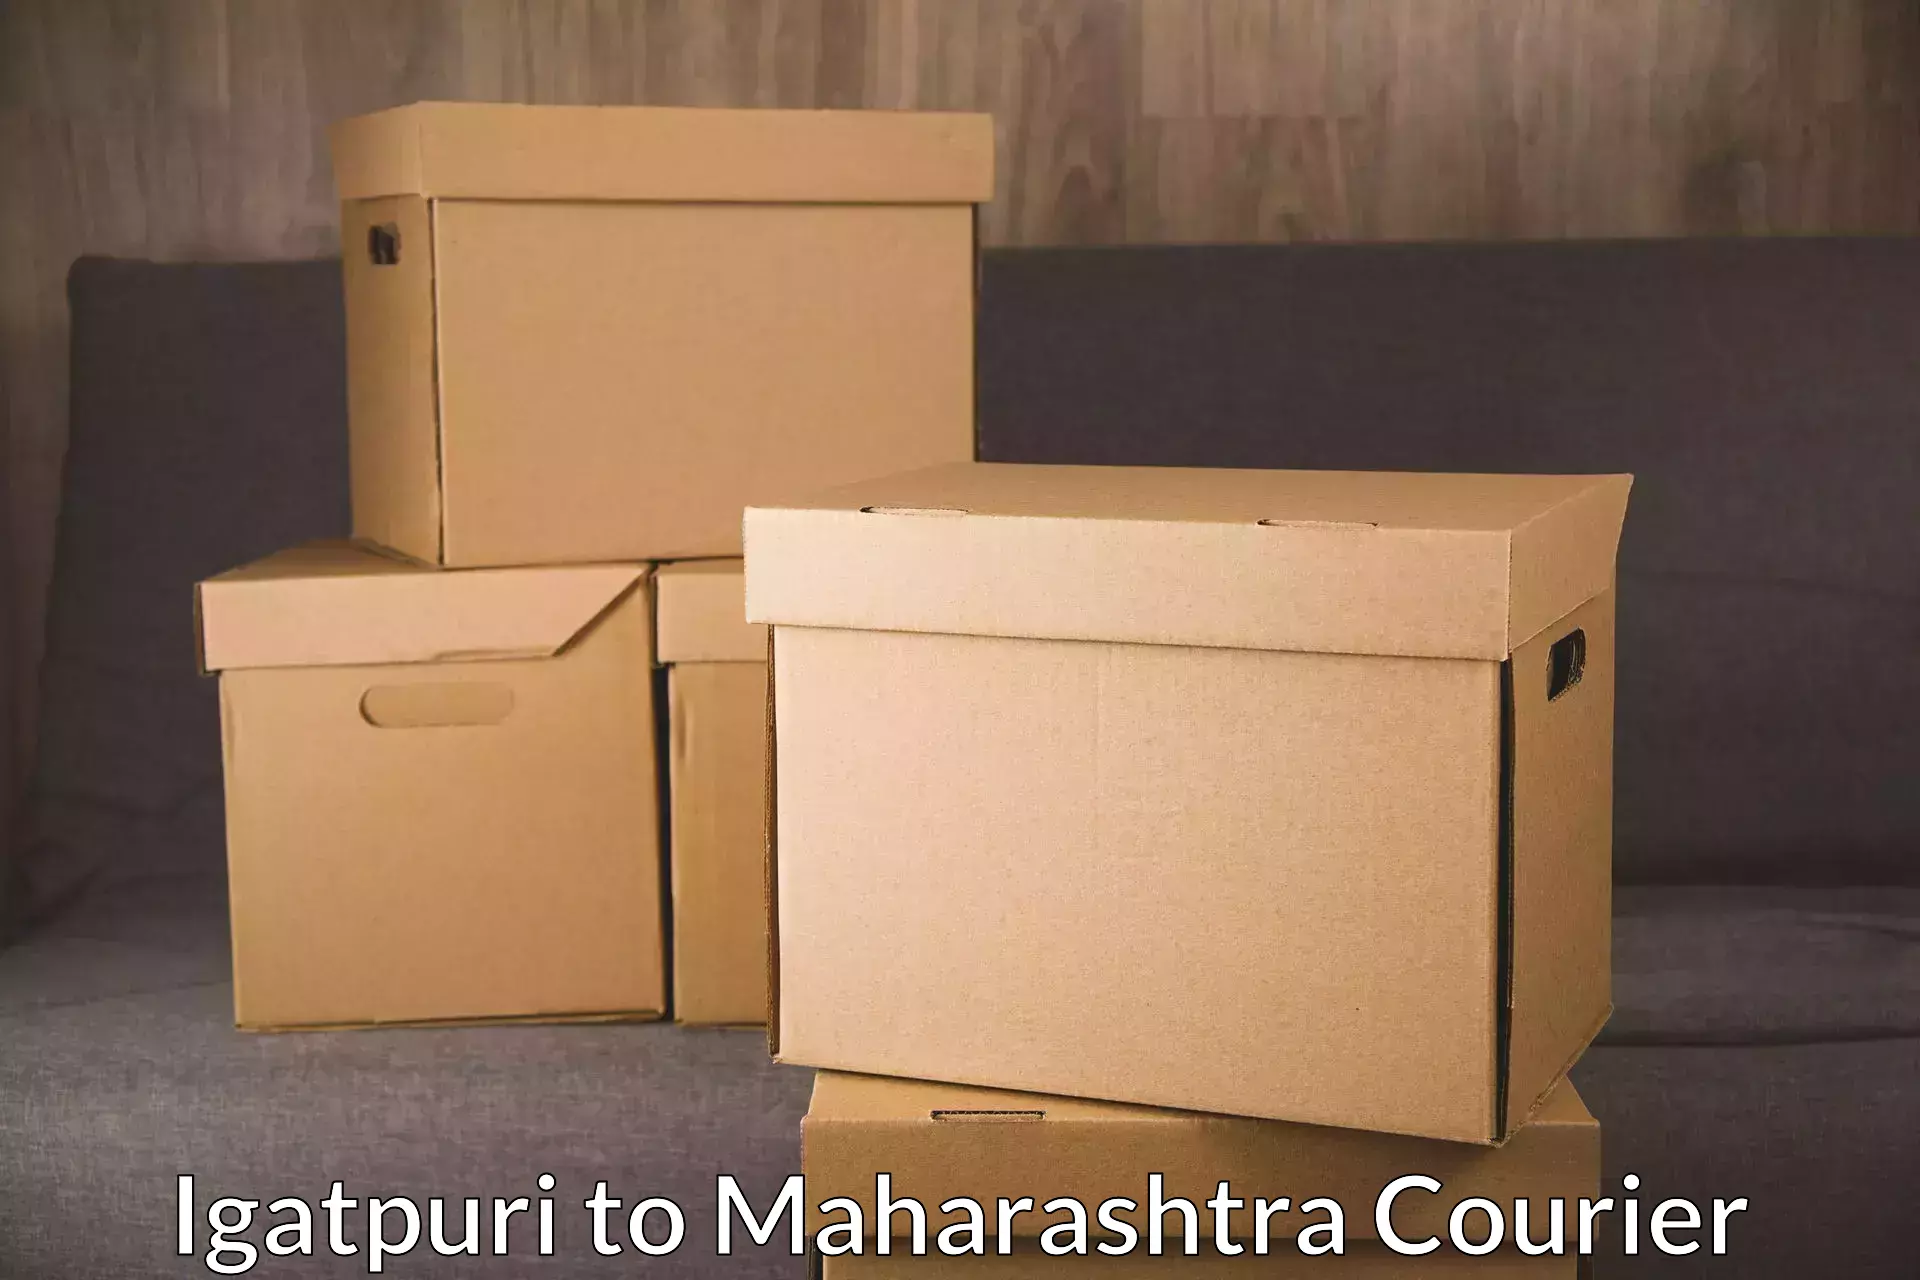 Courier membership in Igatpuri to Alephata